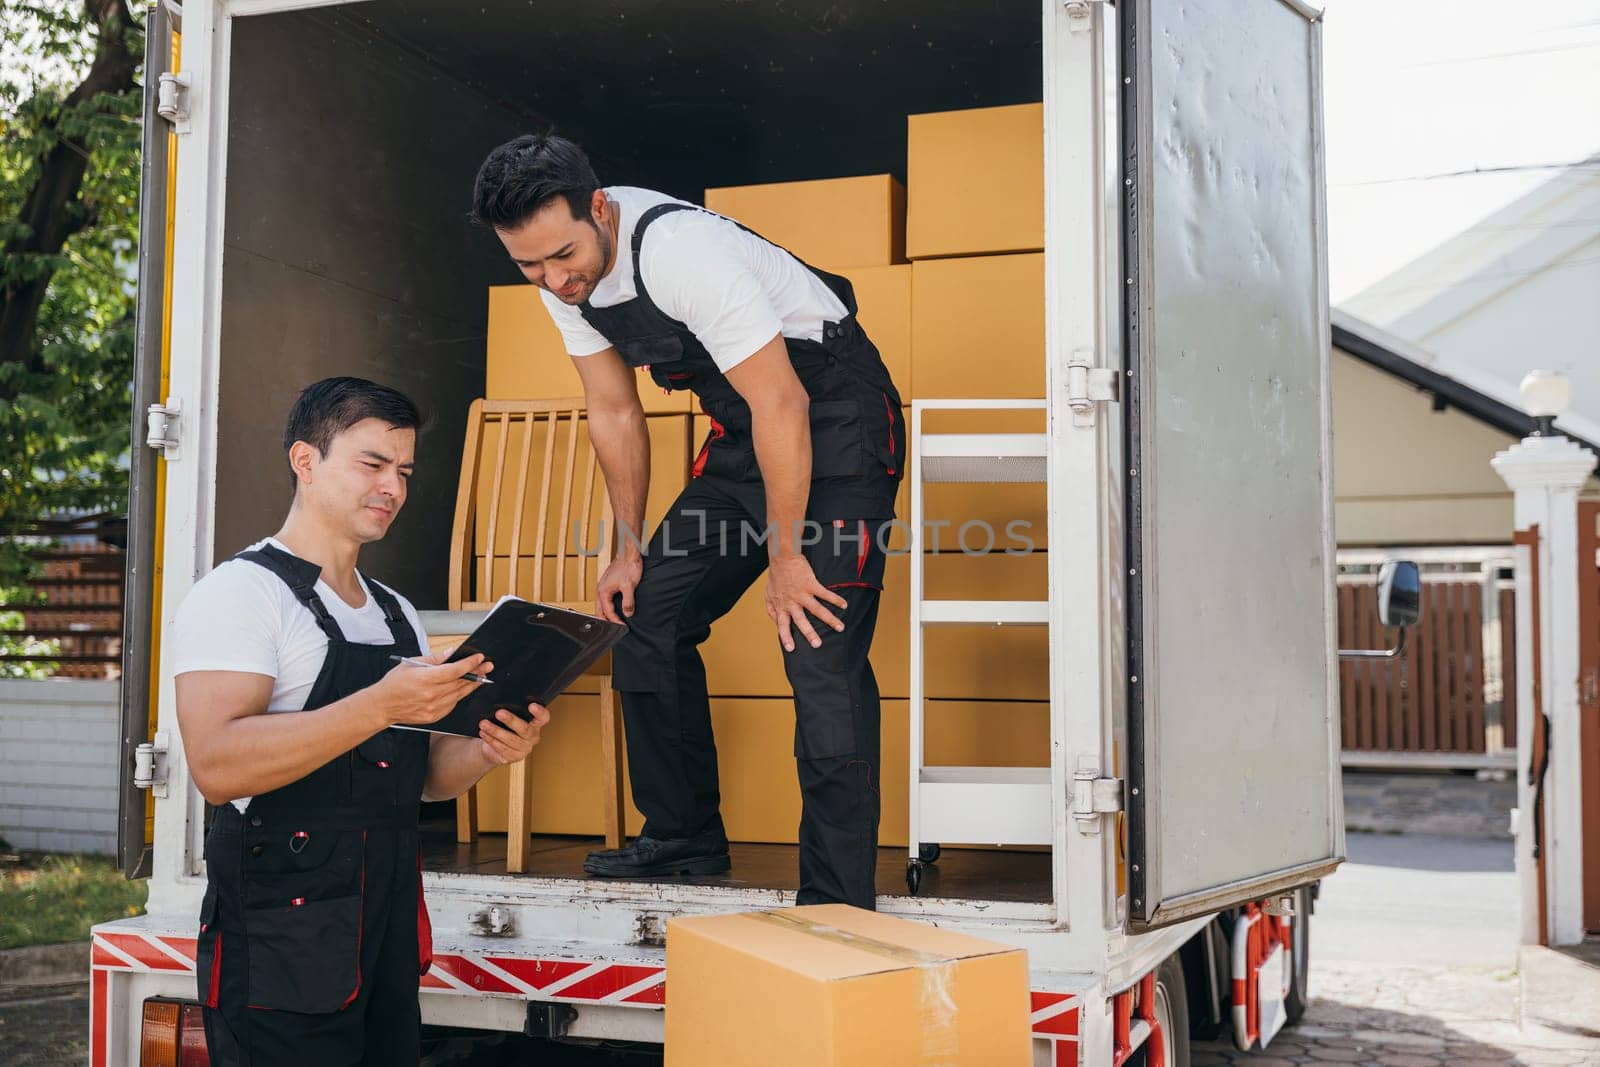 Mover workers in uniform unload boxes checking checklist with a clipboard at the truck. Professional delivery service ensures smooth relocation and efficient shipping. Moving day concept